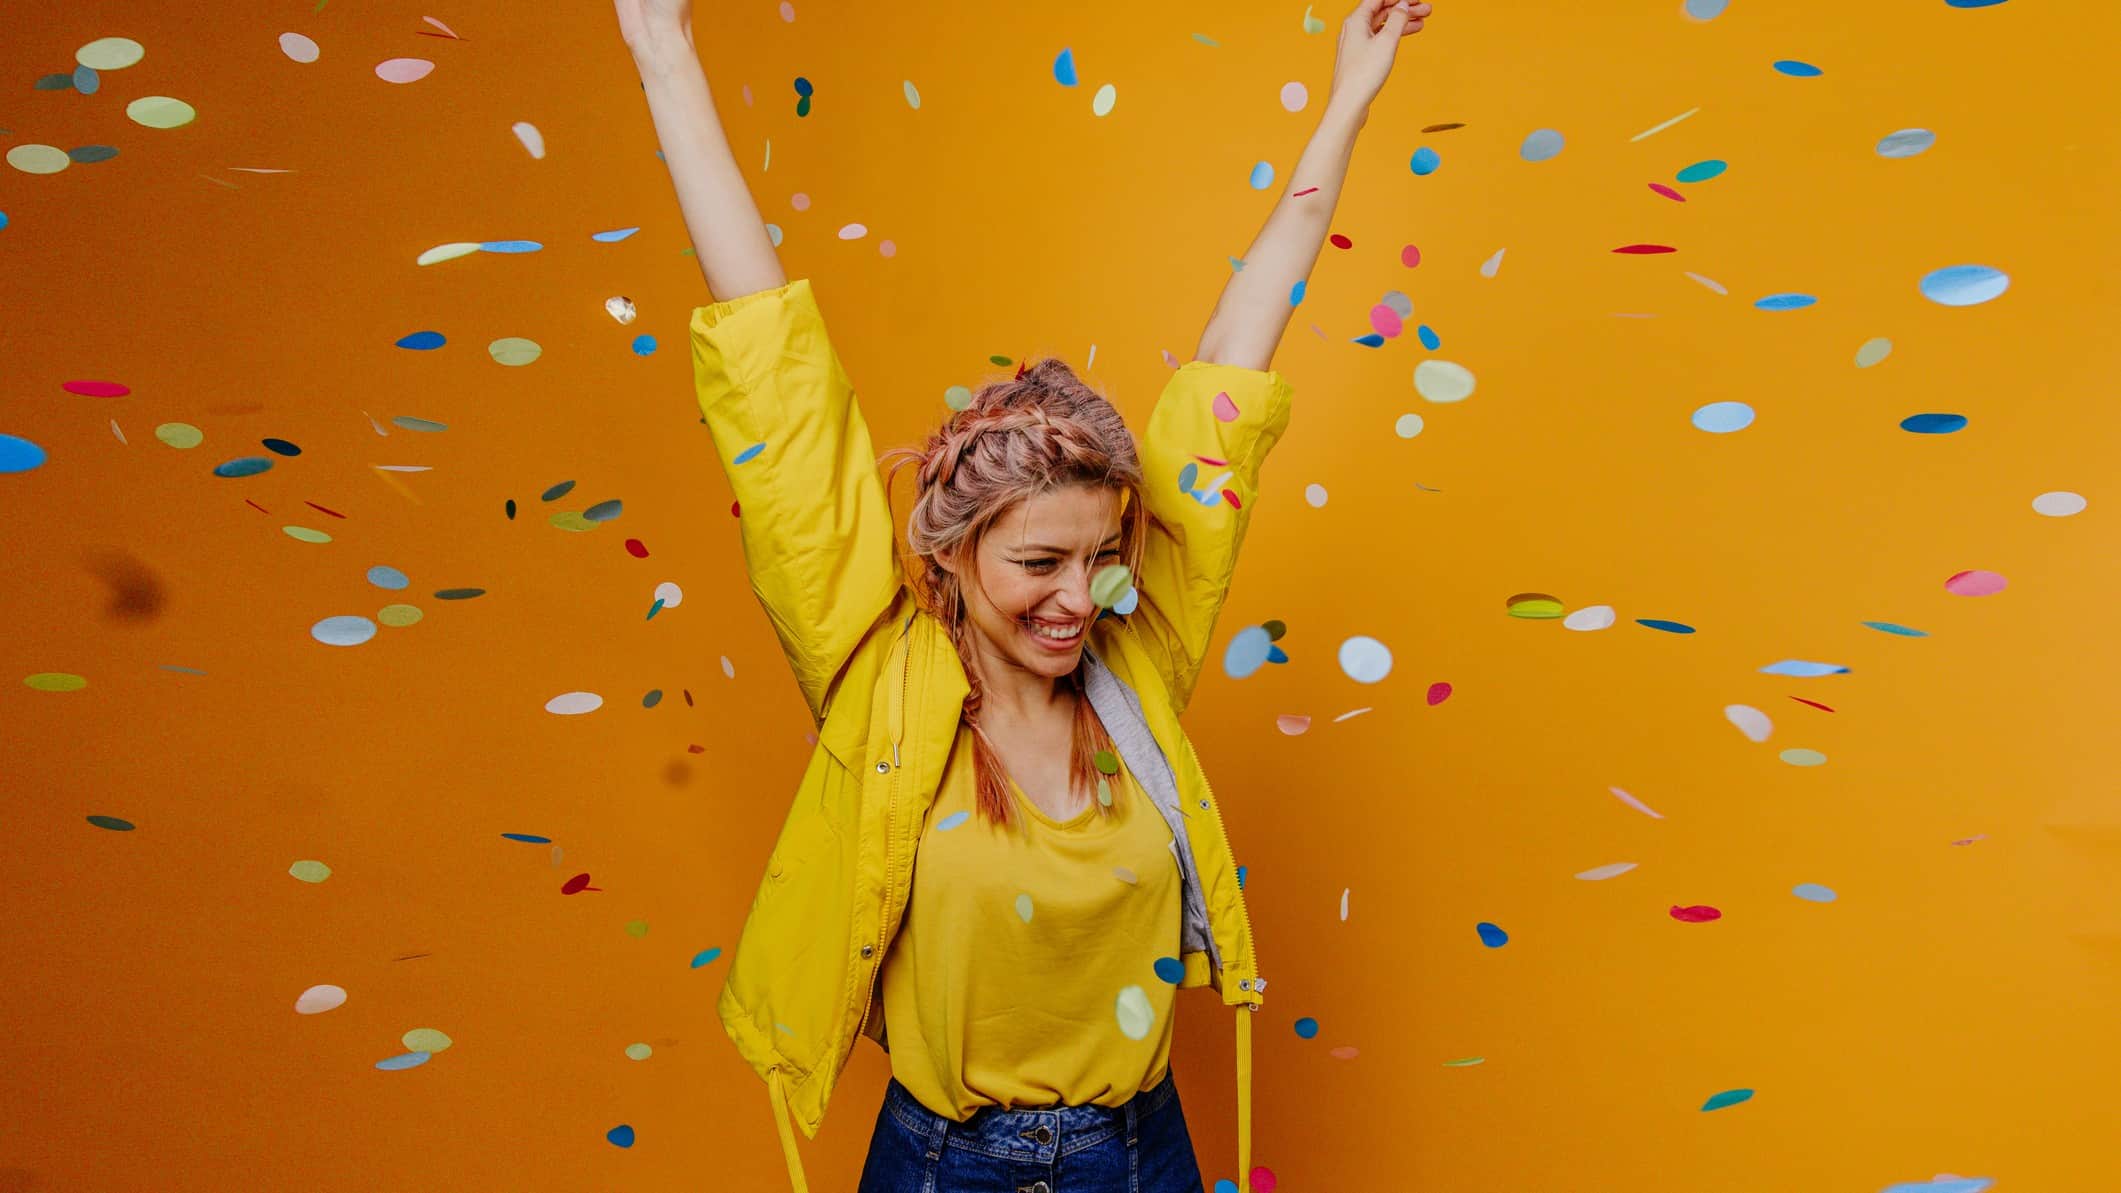 A woman throws her hands in the air in celebration as confetti floats down around her, standing in front of a deep yellow wall.